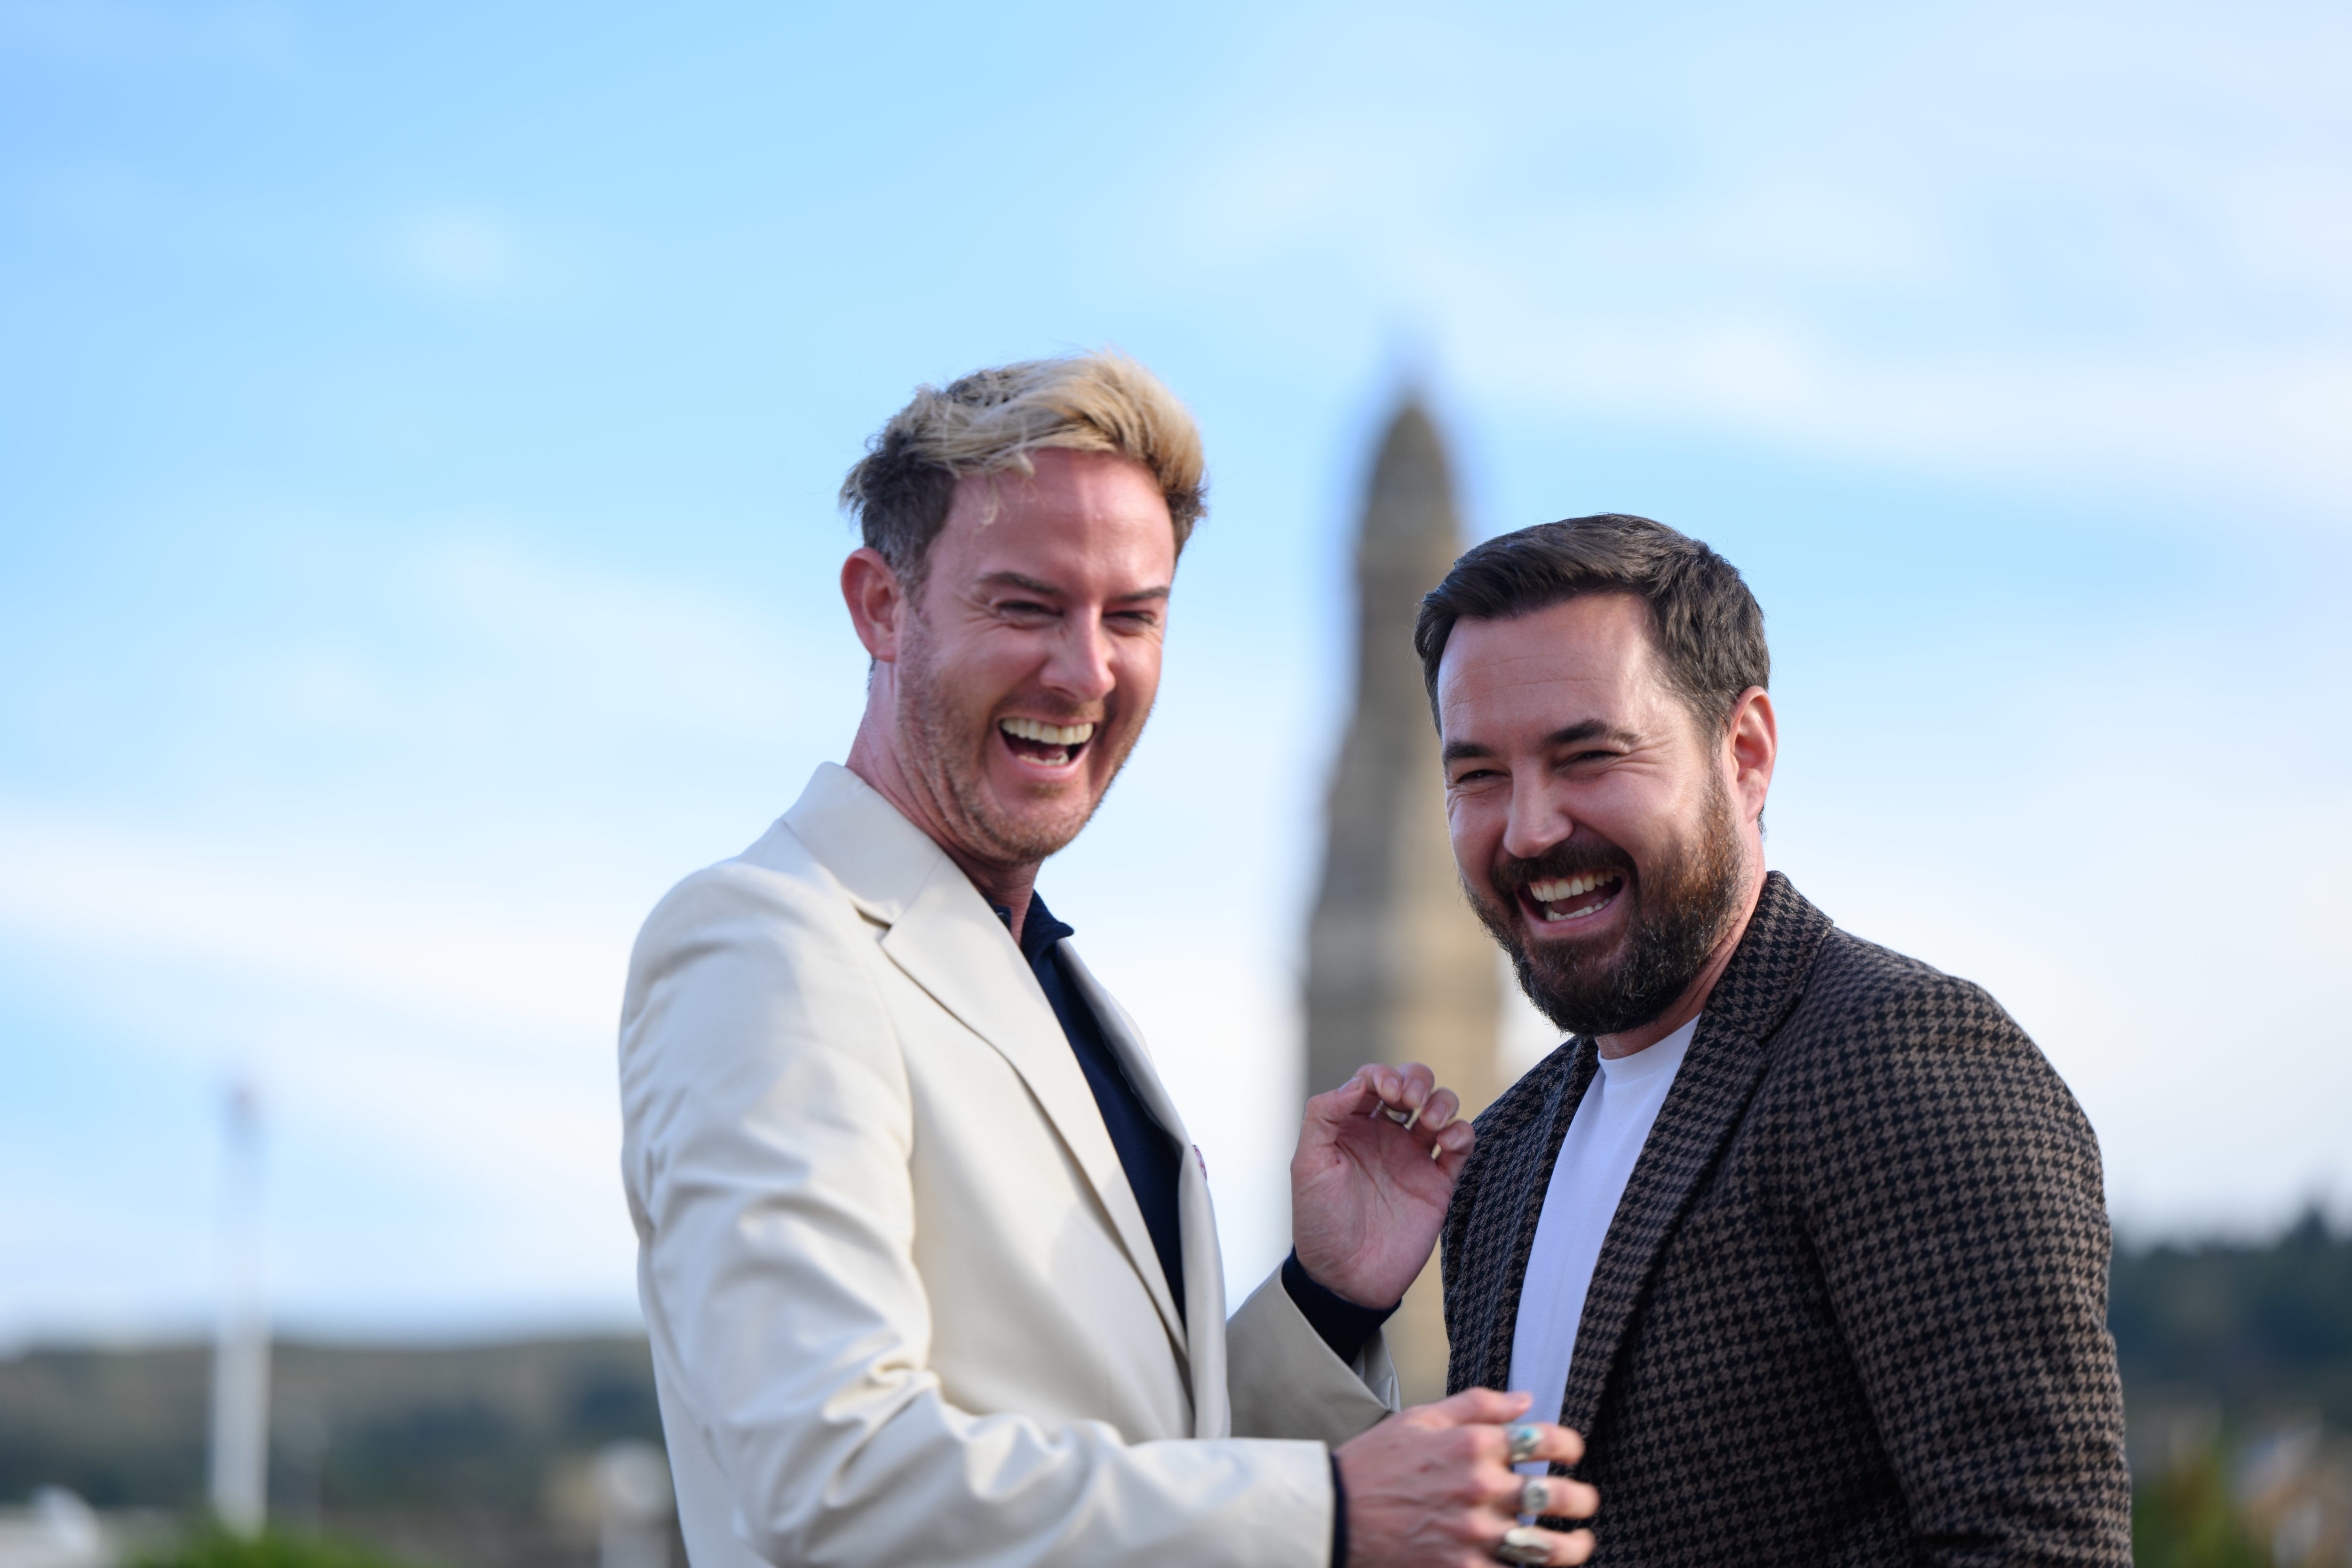 Phil MacHugh (left) and Martin Compston at the Waterfront Cinema in Greenock ahead of the preview of their new series, Martin Compston’s Scottish Fling. (John Linton/PA)